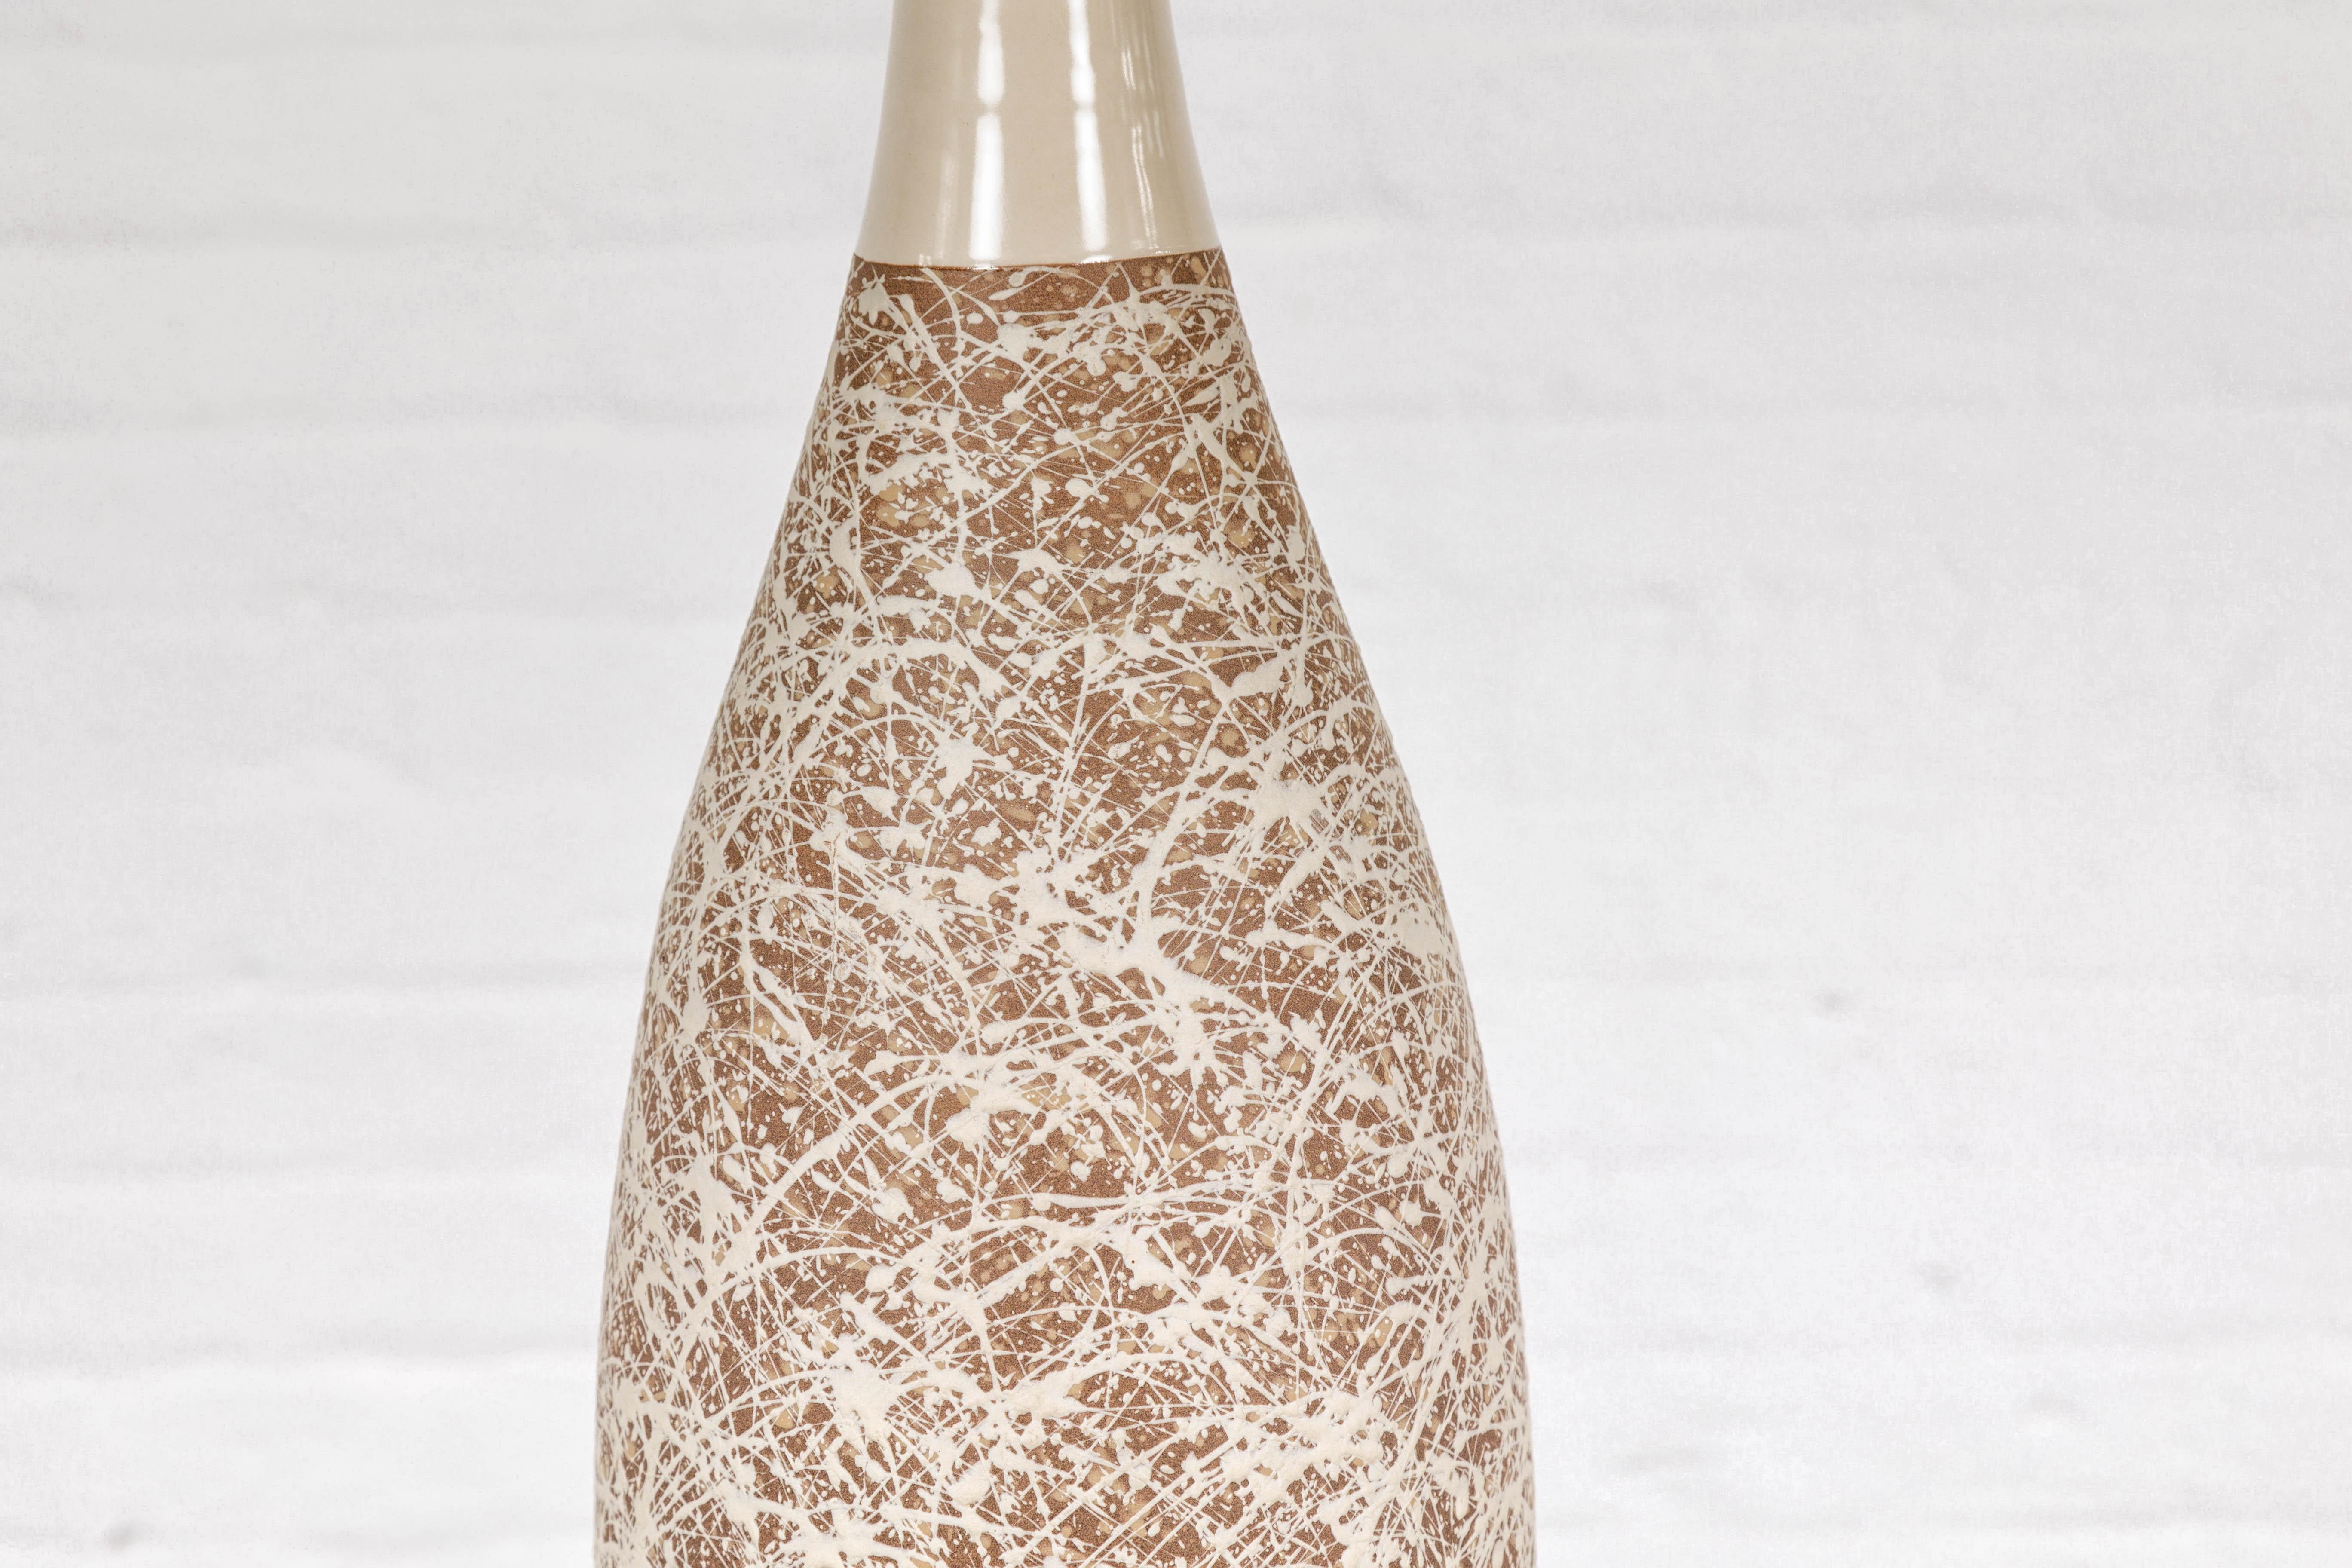 Hand-Crafted Artisan Bottle Shaped Brown and Cream Ceramic Vase with Dripping For Sale 1